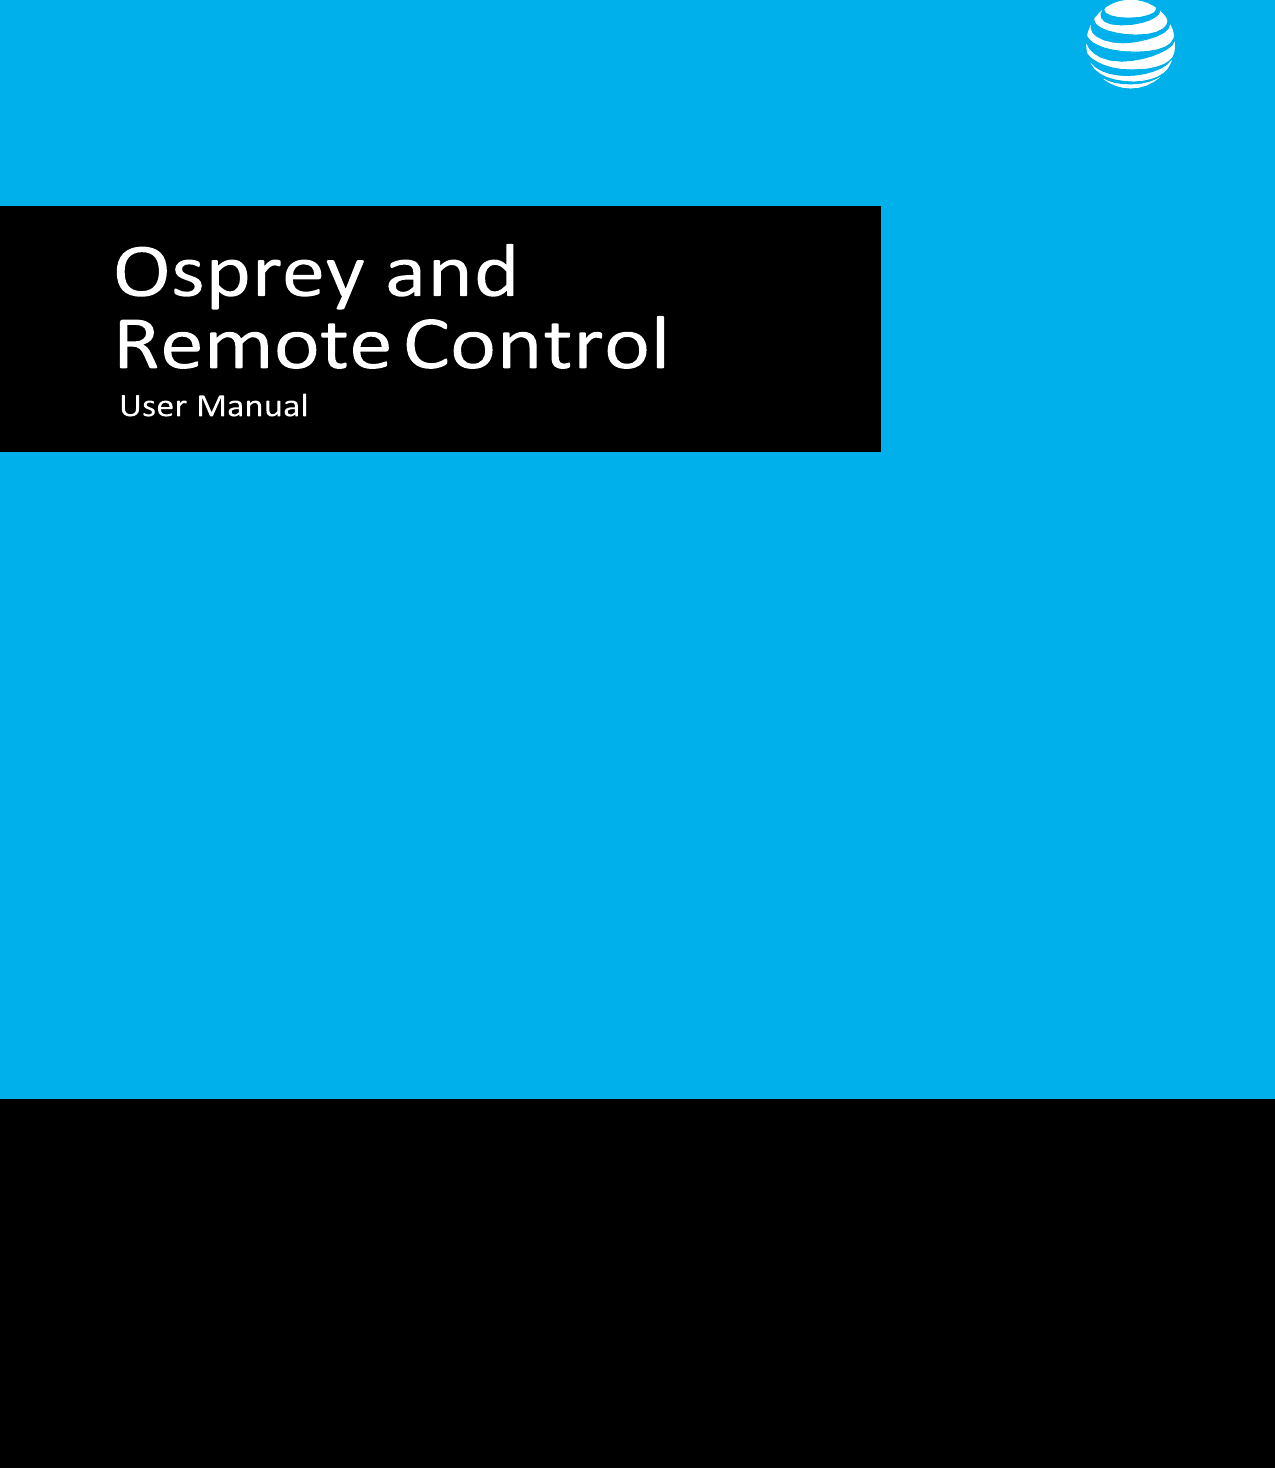   User Manual—Osprey and Remote Control    Version 1.0  08/2017   User Manual—Osprey and Remote Control                                               